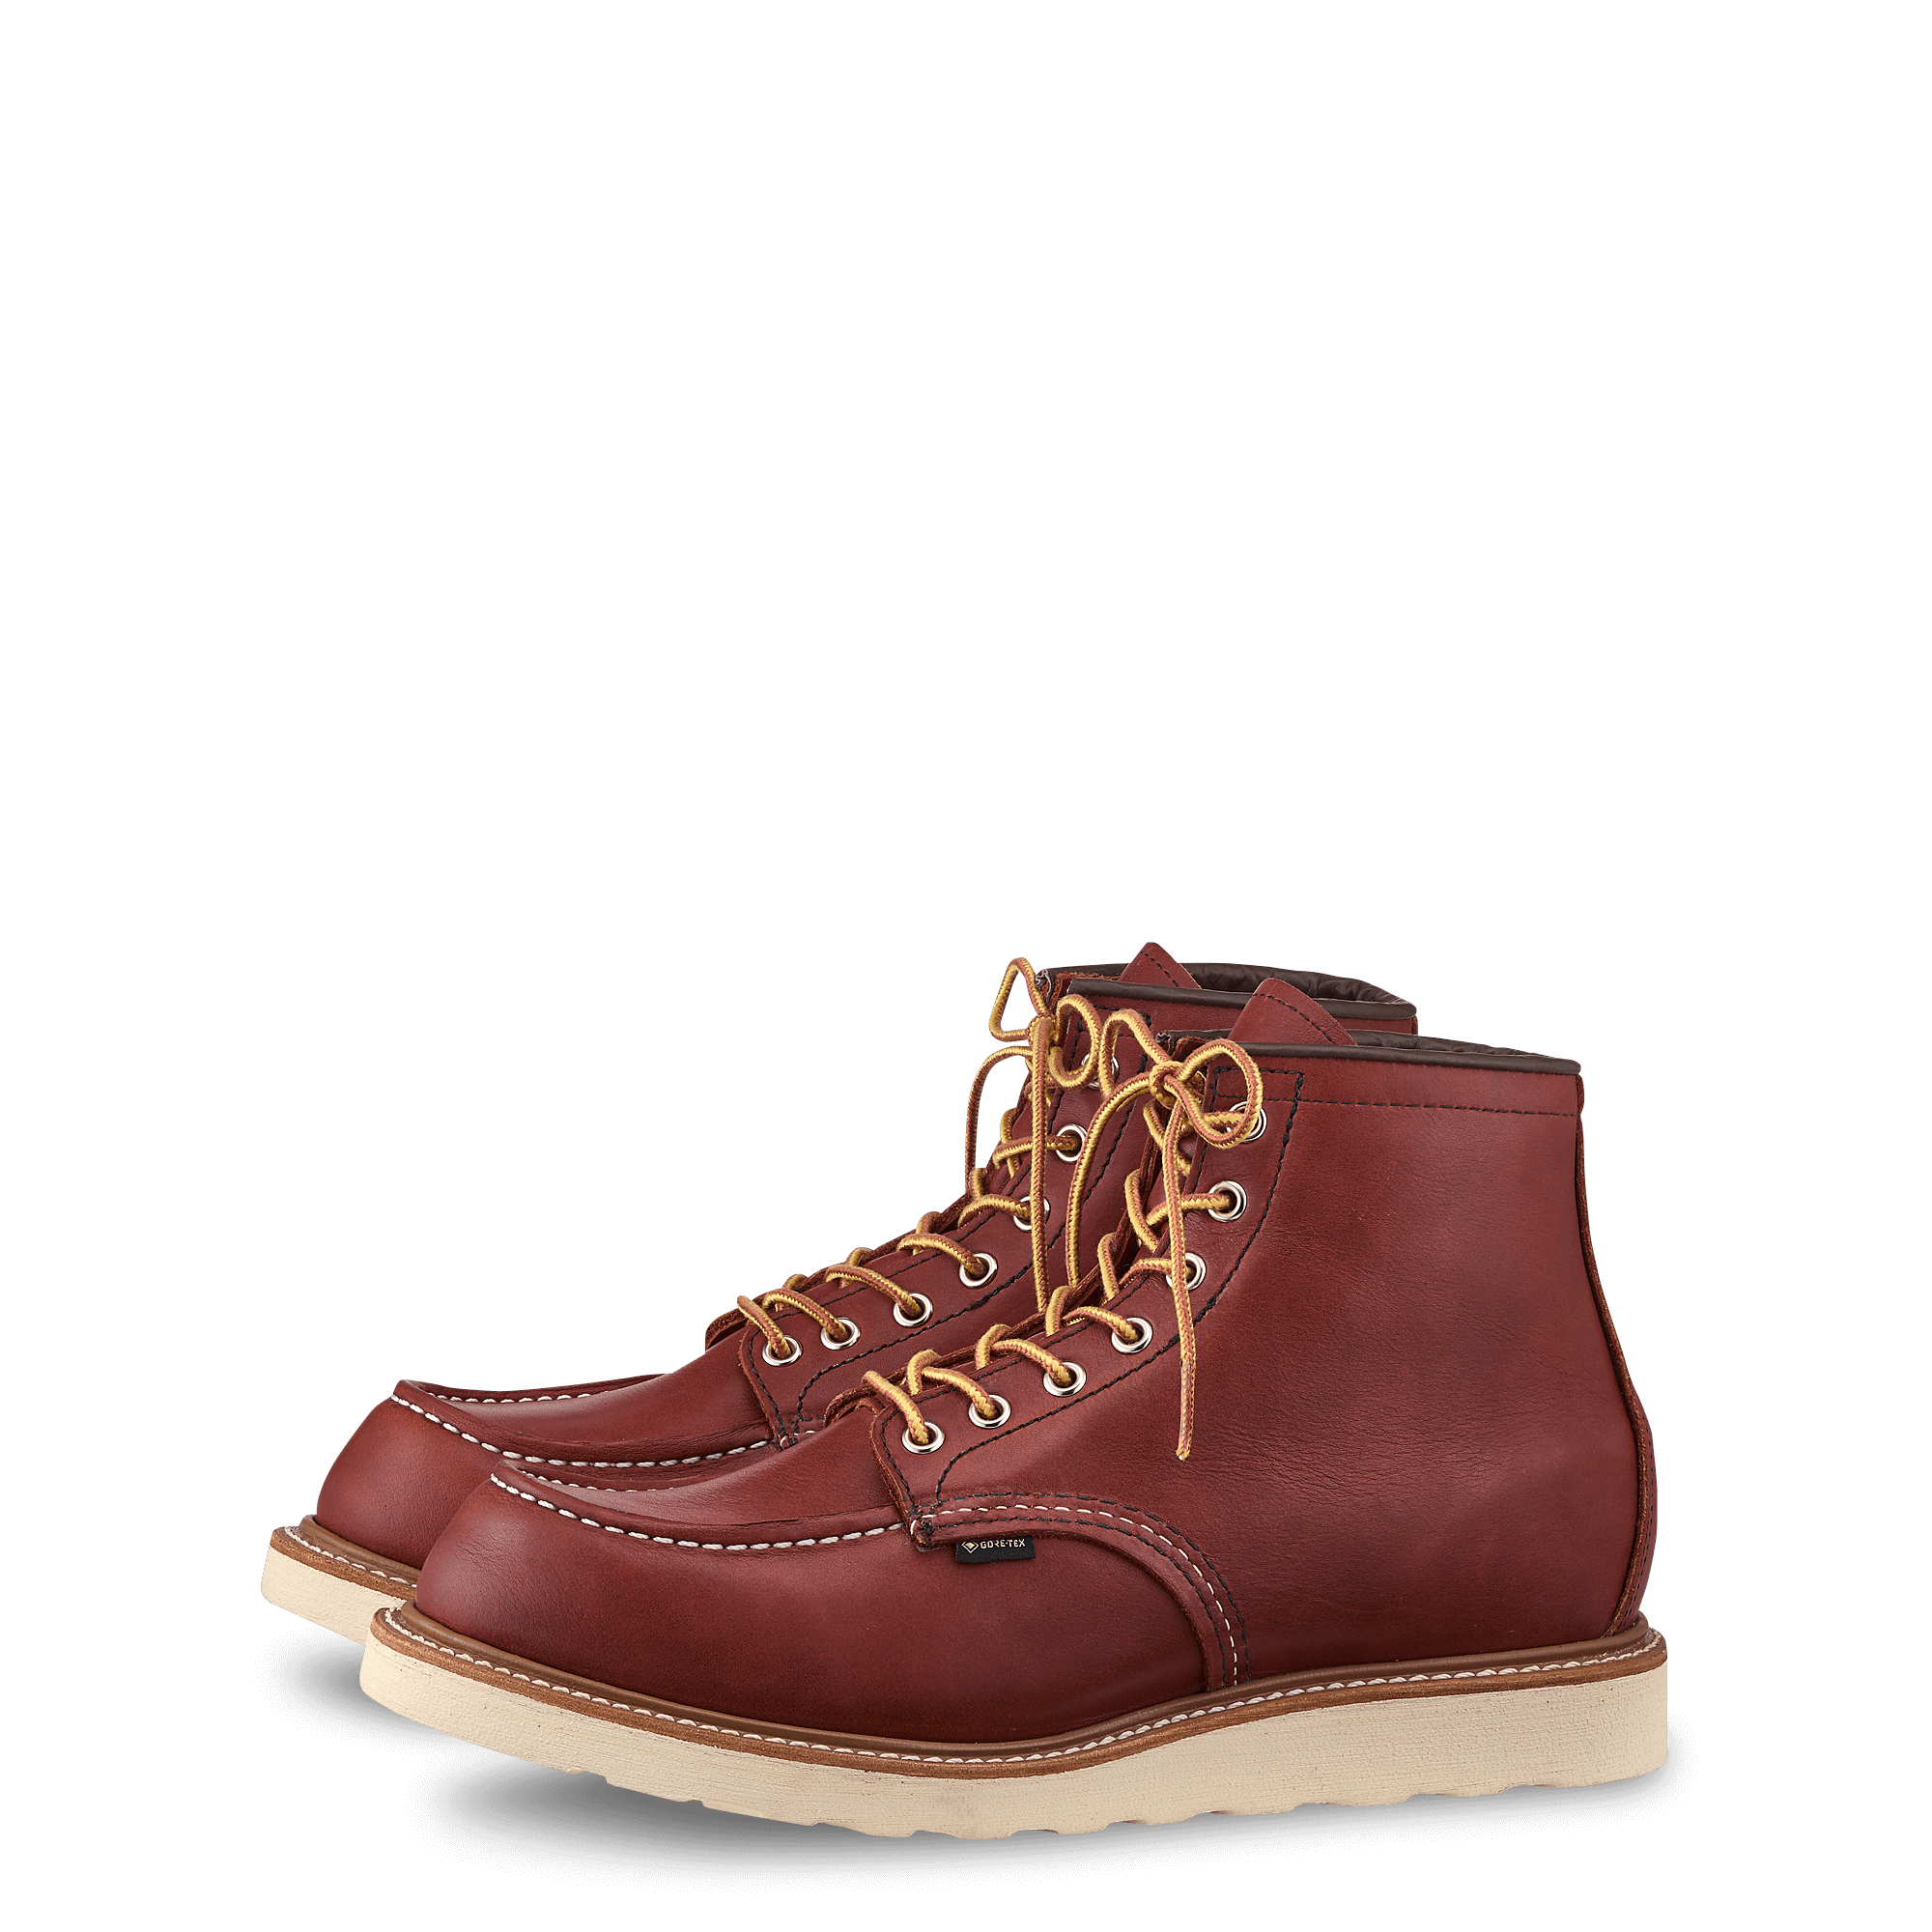 Red Wing Shoes Red Wing 8864 Gore-tex Heritage Work 6" Moc Toe Boot Russet Taos